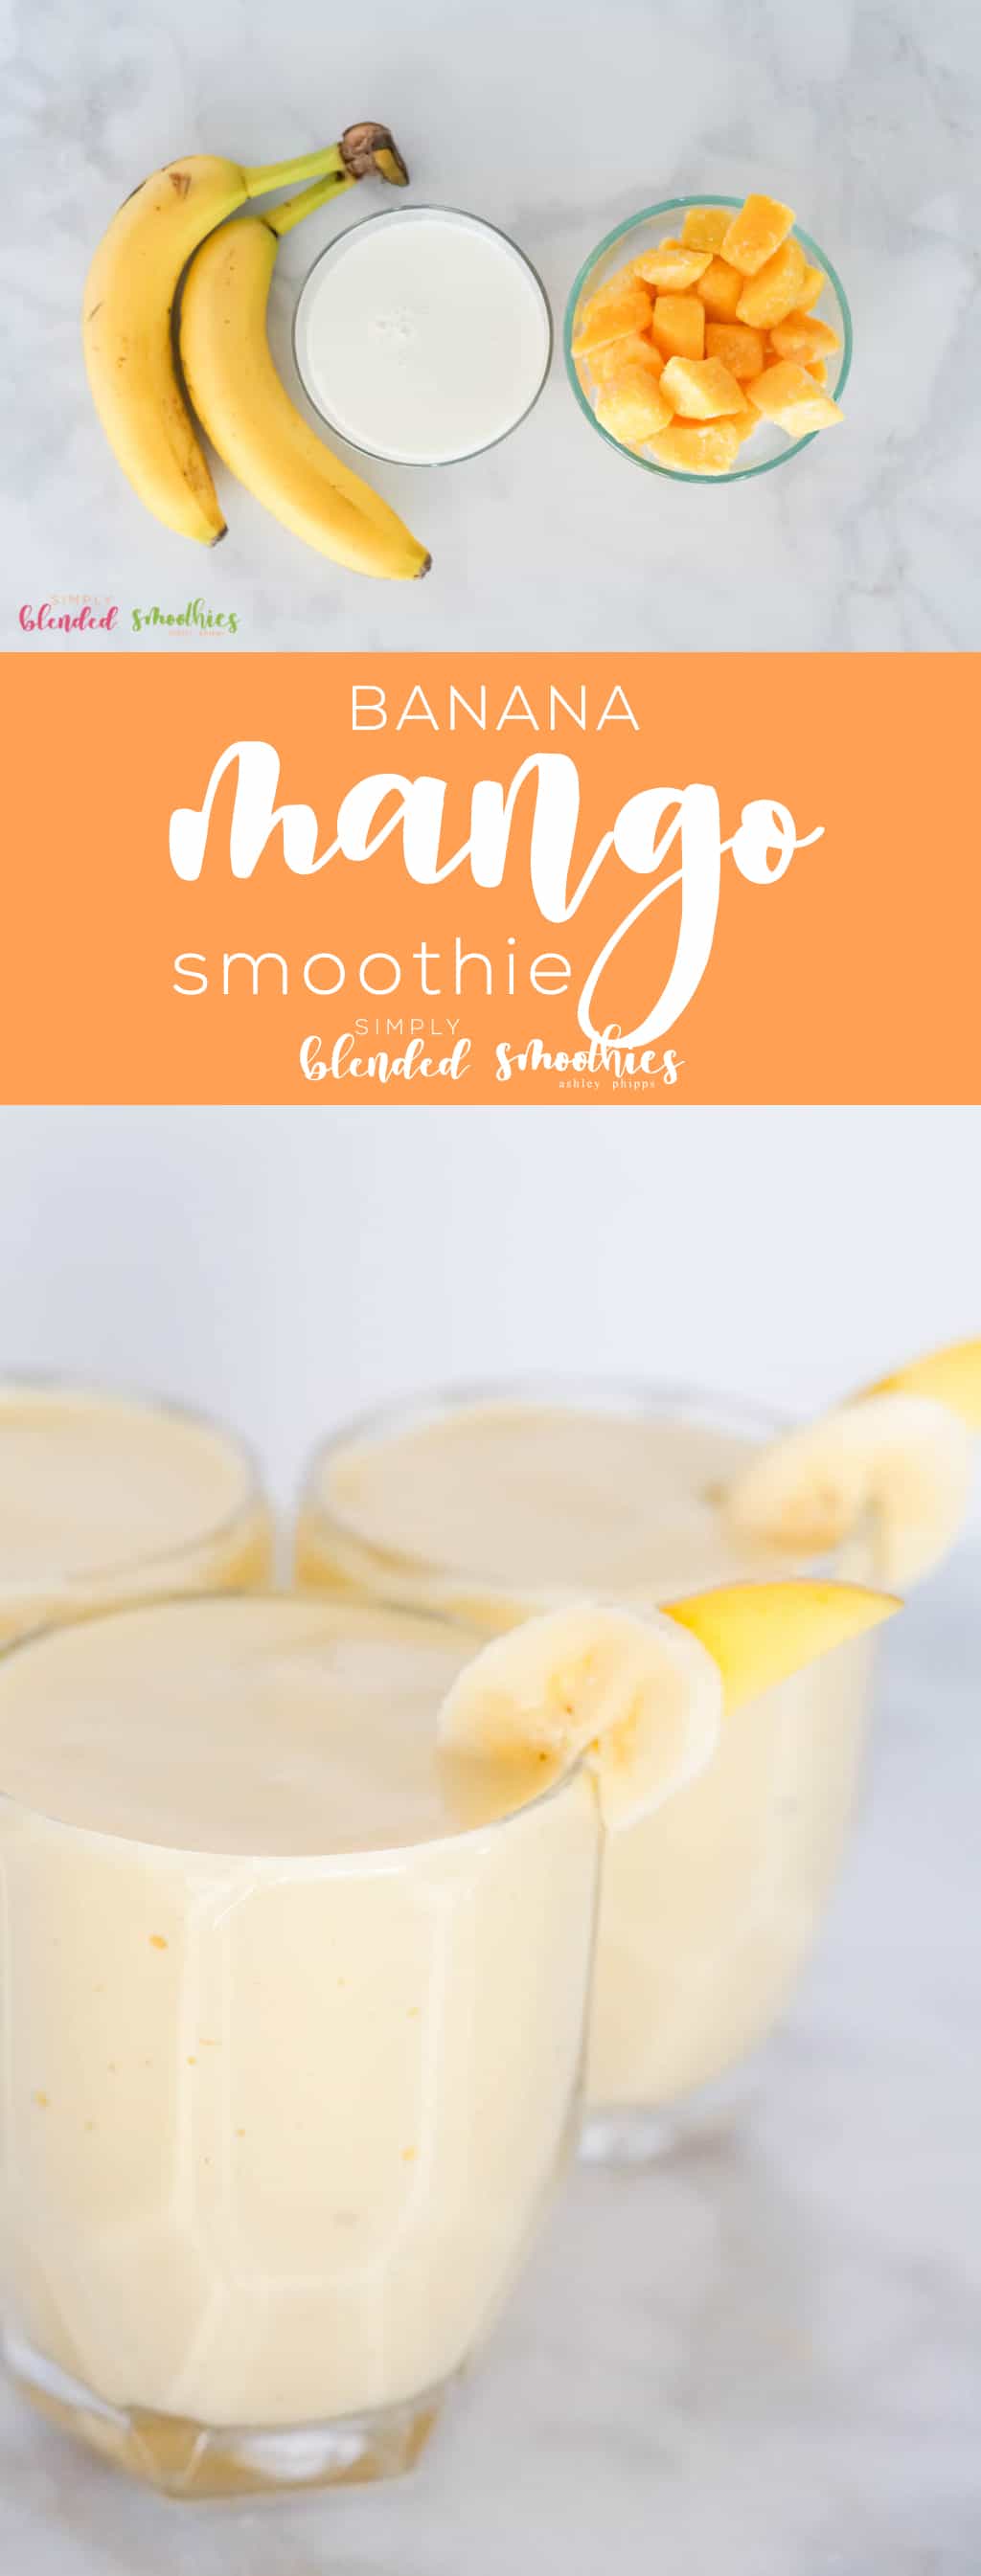 This Delicious Mango Banana Smoothie Is The Perfect Way To Start Your Morning With A Tasty And Healthy Smoothie